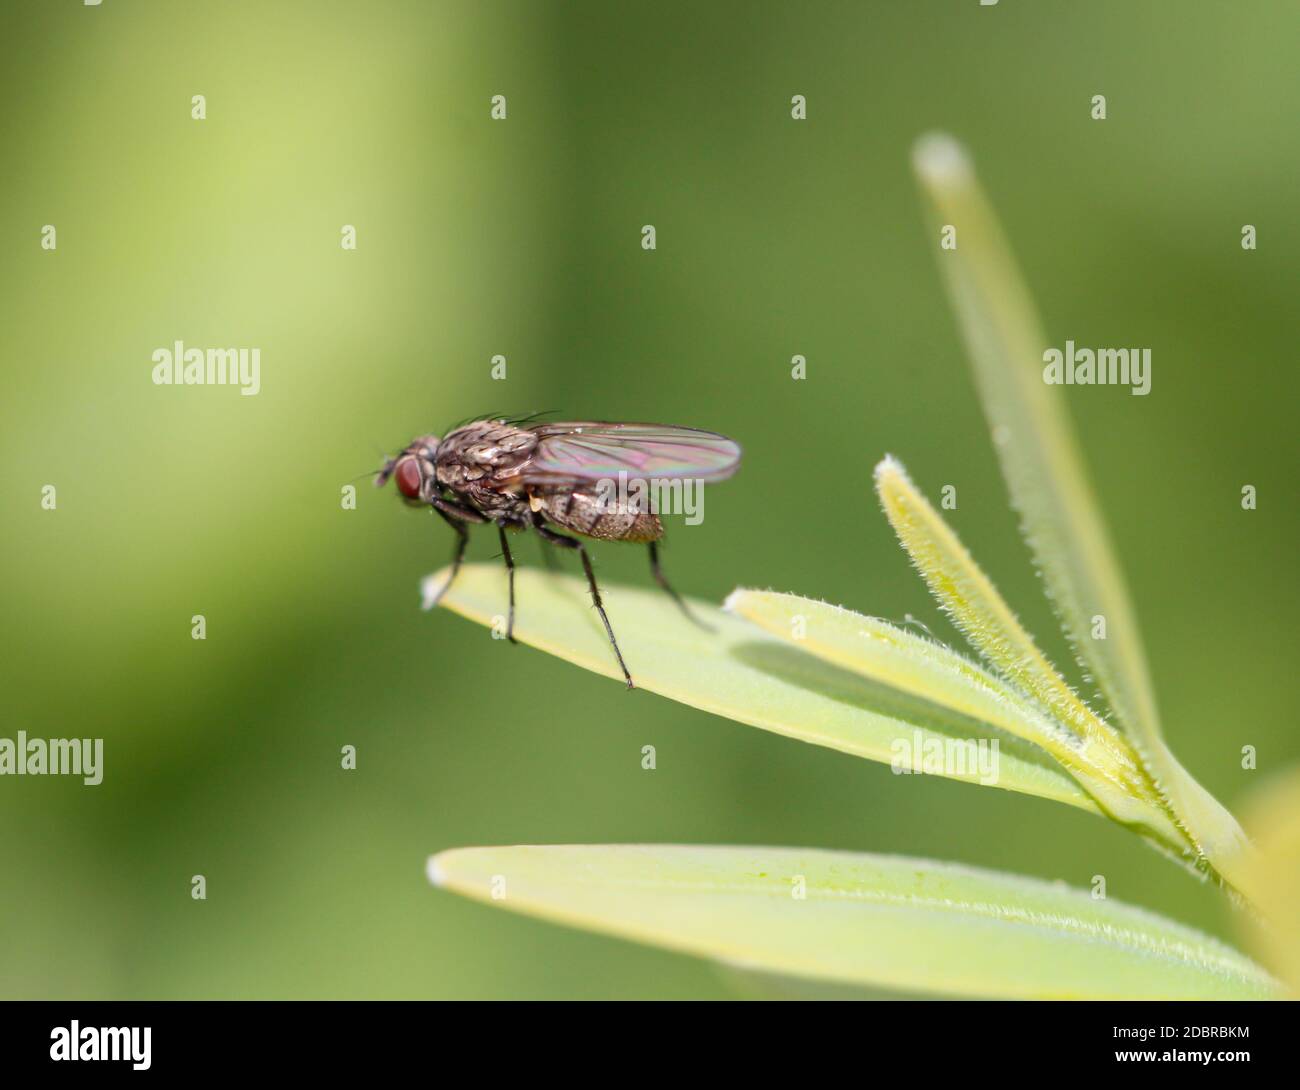 Macro of a fly sitting on a plant. Stock Photo